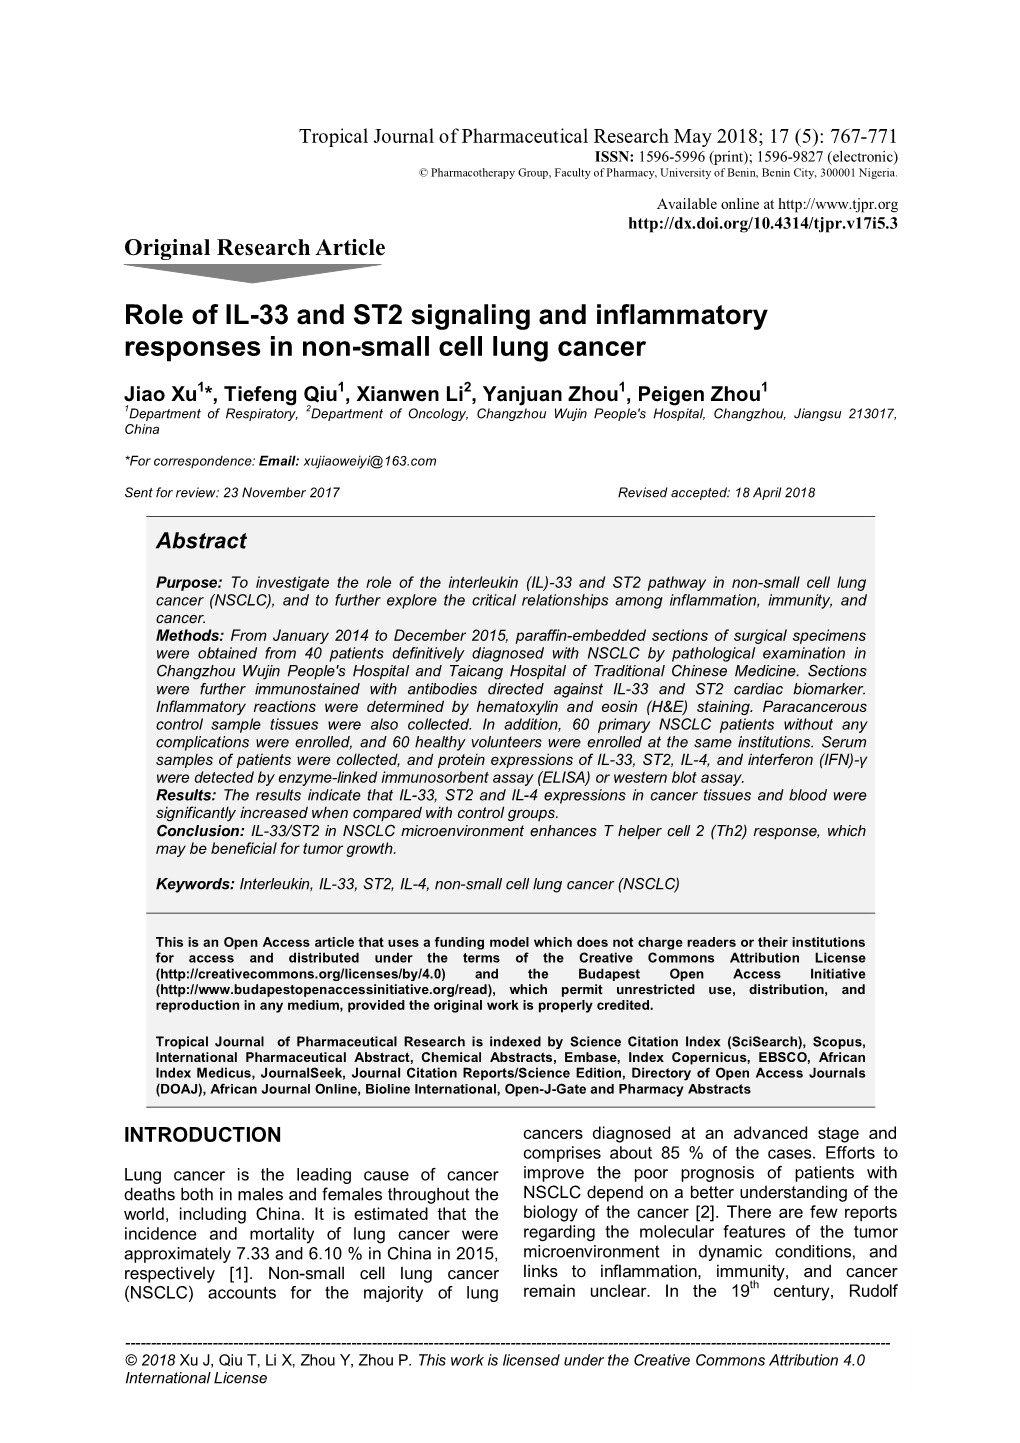 Role of IL-33 and ST2 Signaling and Inflammatory Responses in Non-Small Cell Lung Cancer